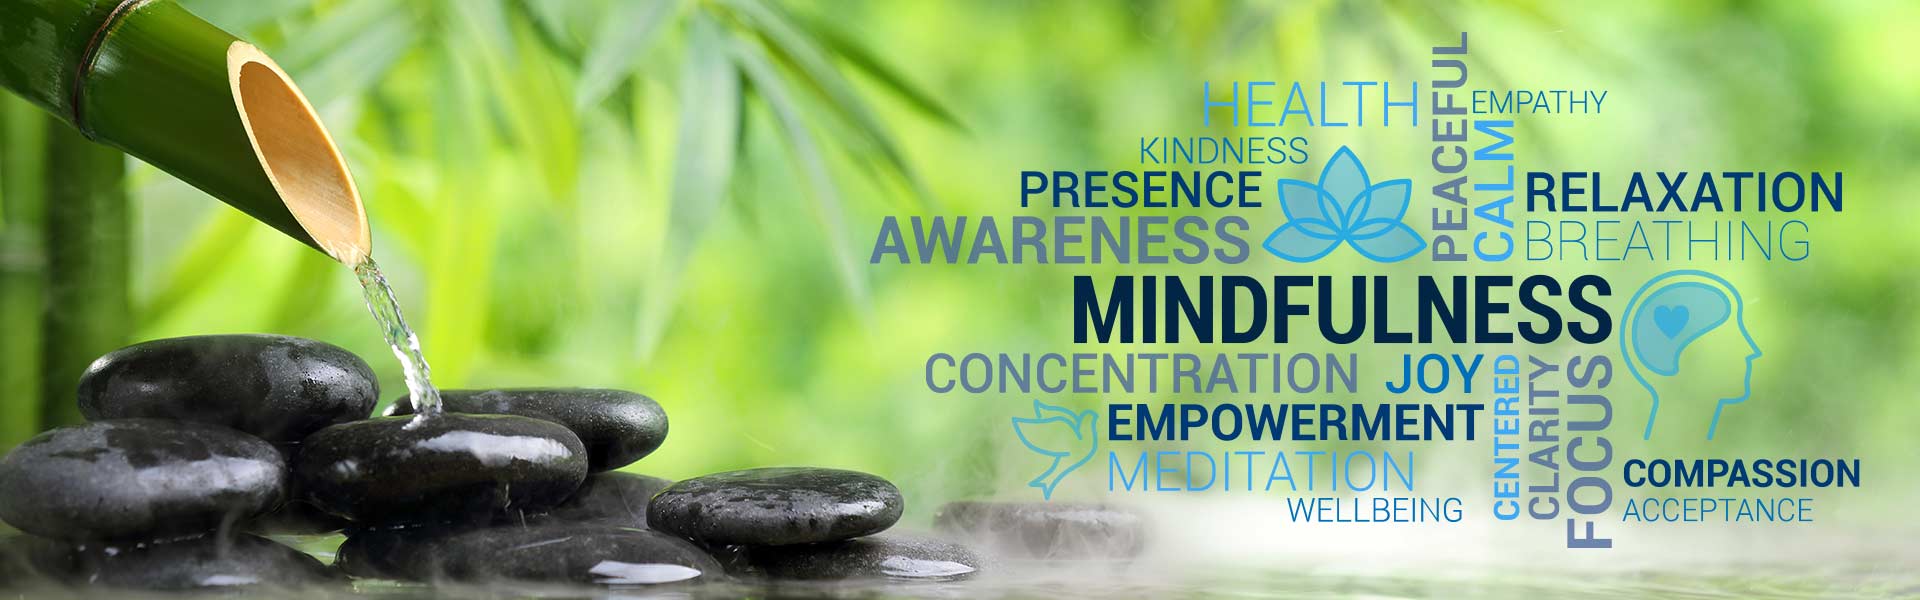 Word cloud content: mindfulness, concentration, joy, empowerment, meditation, wellbeing, centered, clarity, focus, compassion, acceptance, health, kindness, presence, awareness, peaceful, calm, empathy, relaxation, breathing